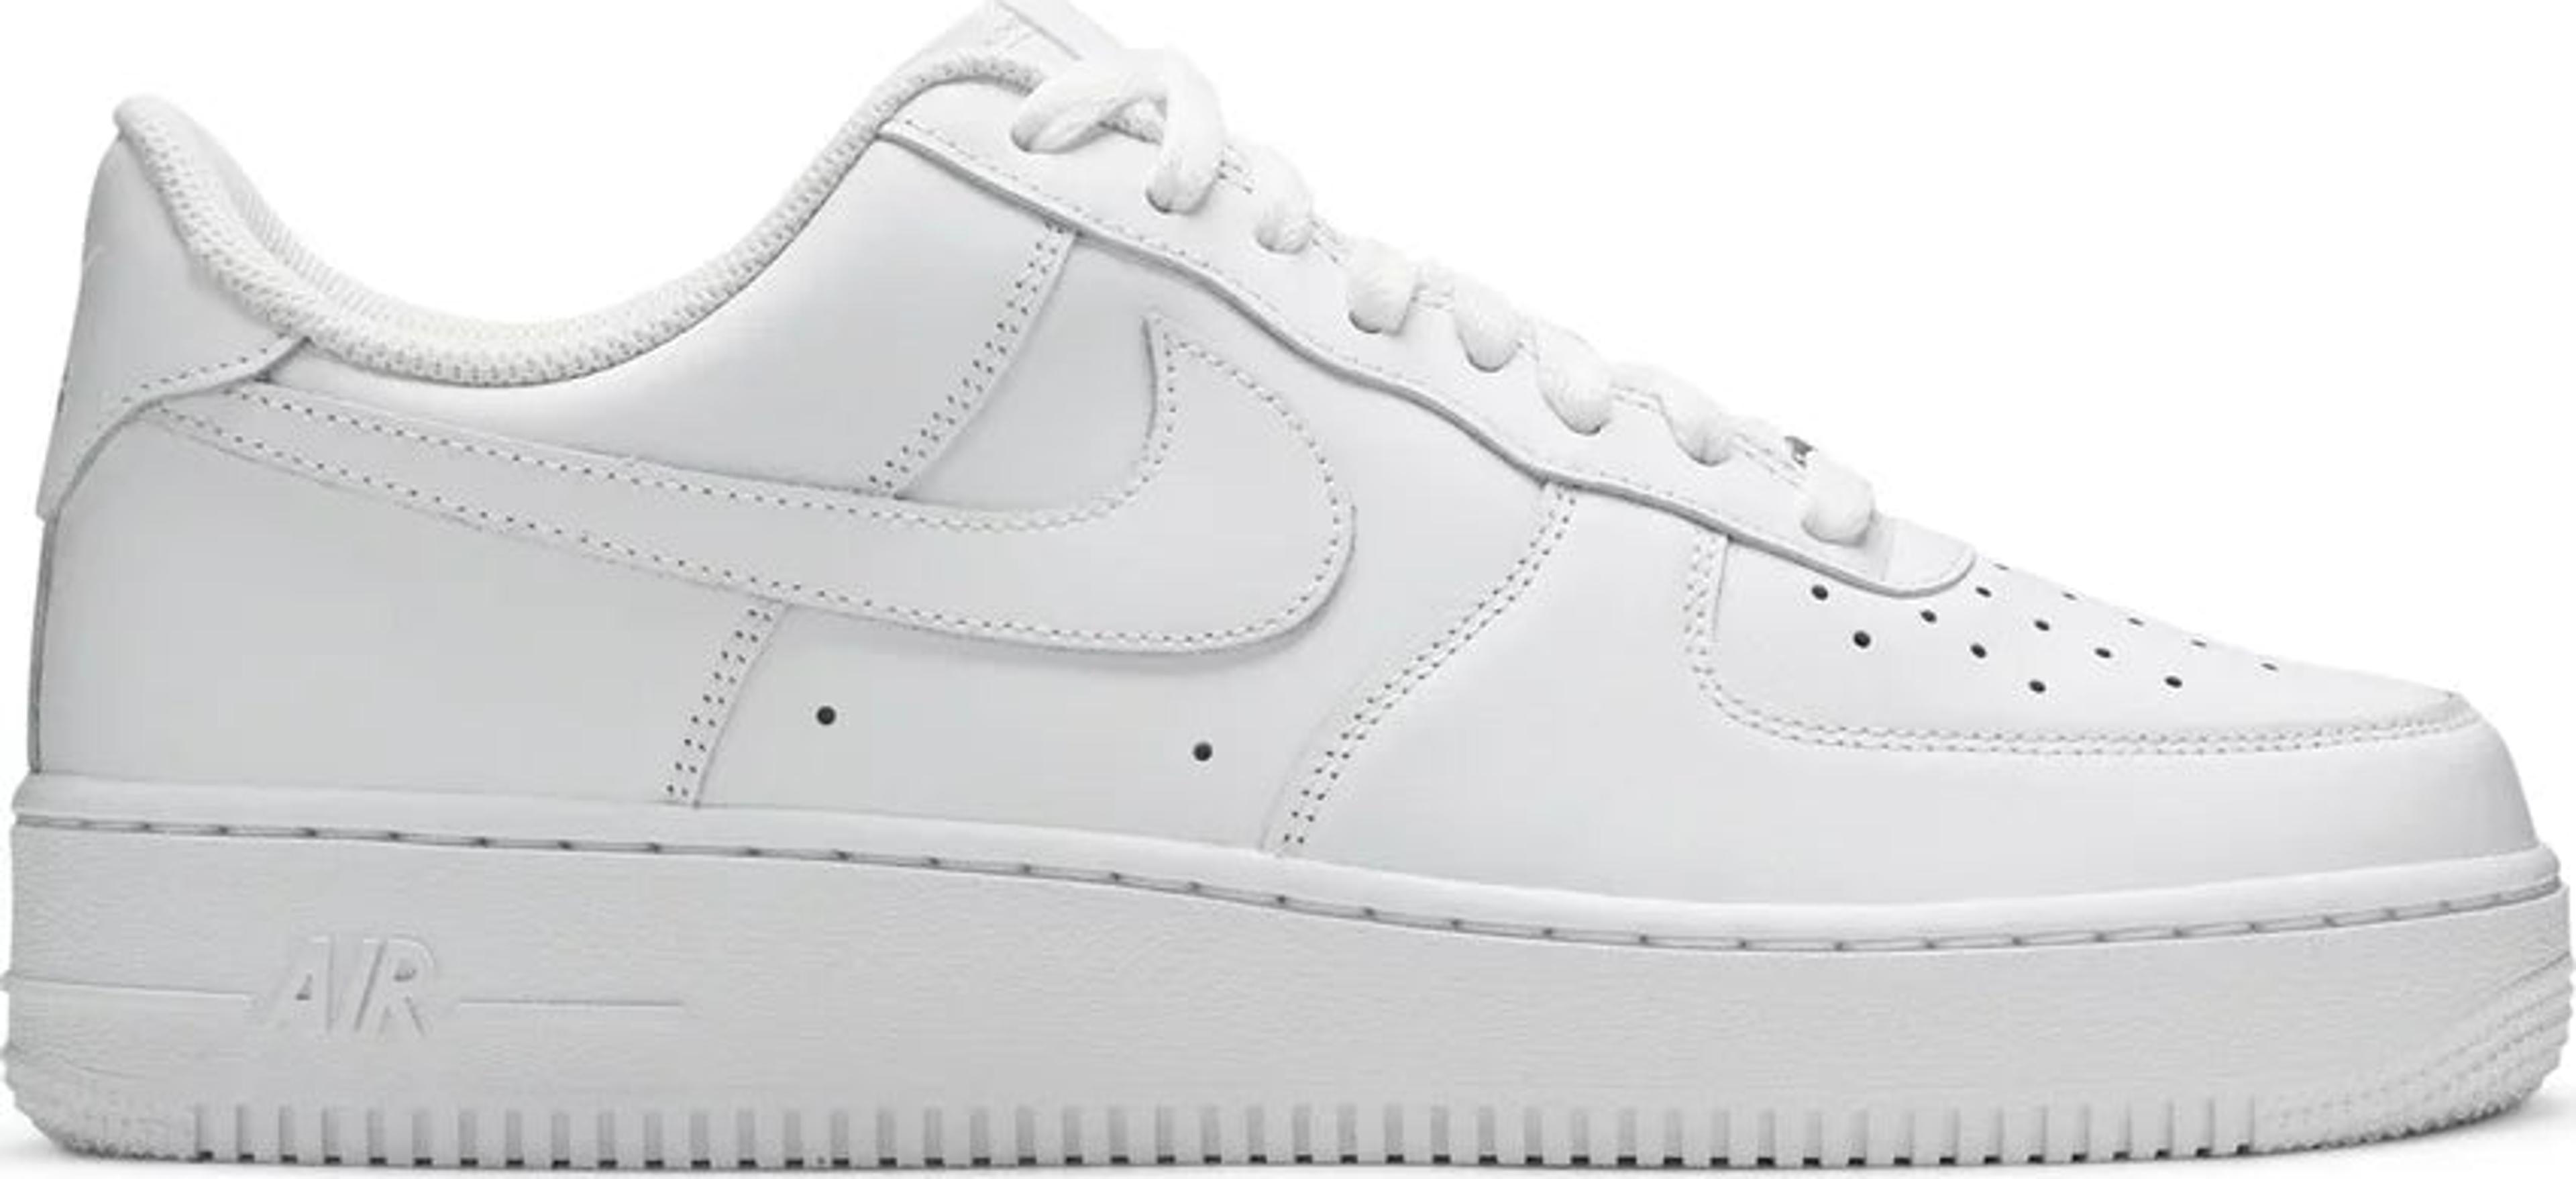 Nike Air Force 1 Low '07 - White